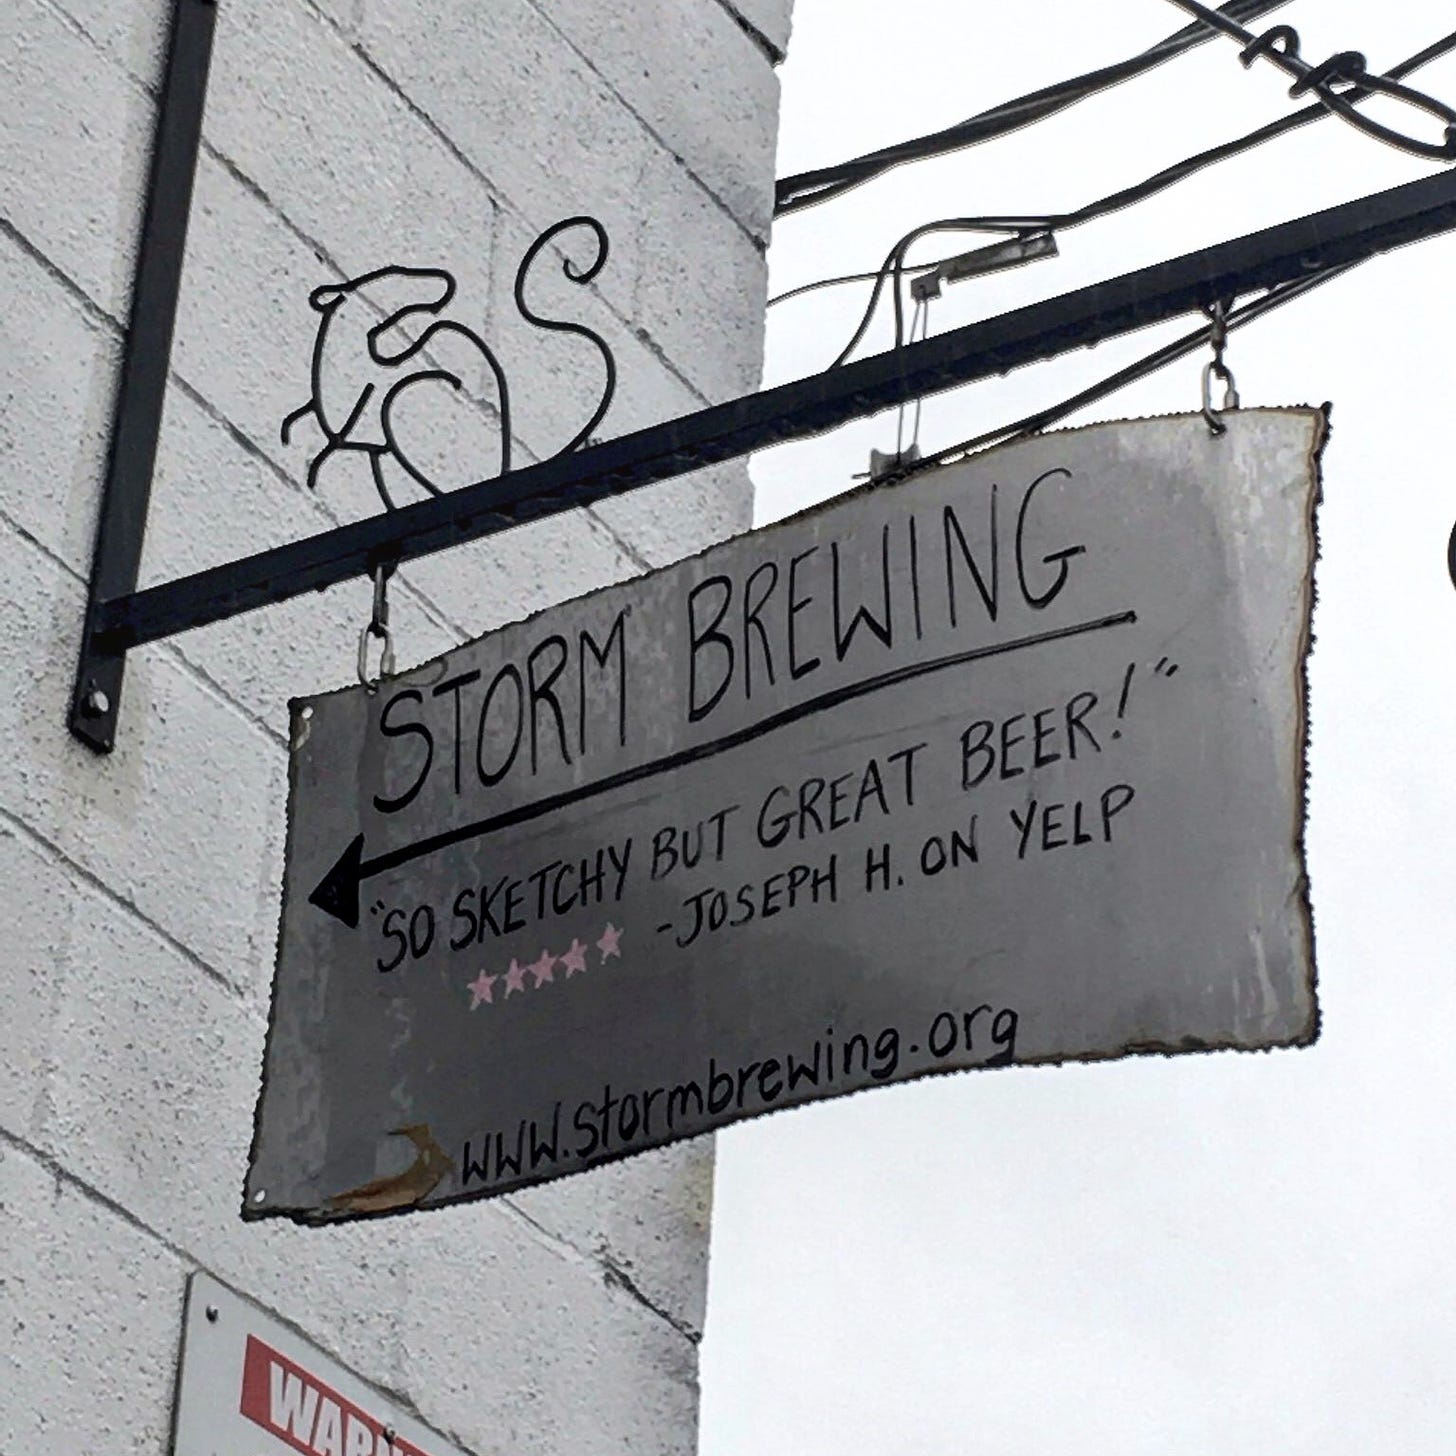 Storm Brewing: "So Sketchy But Great Beer!" - Joseph H. on Yelp (5 Stars)